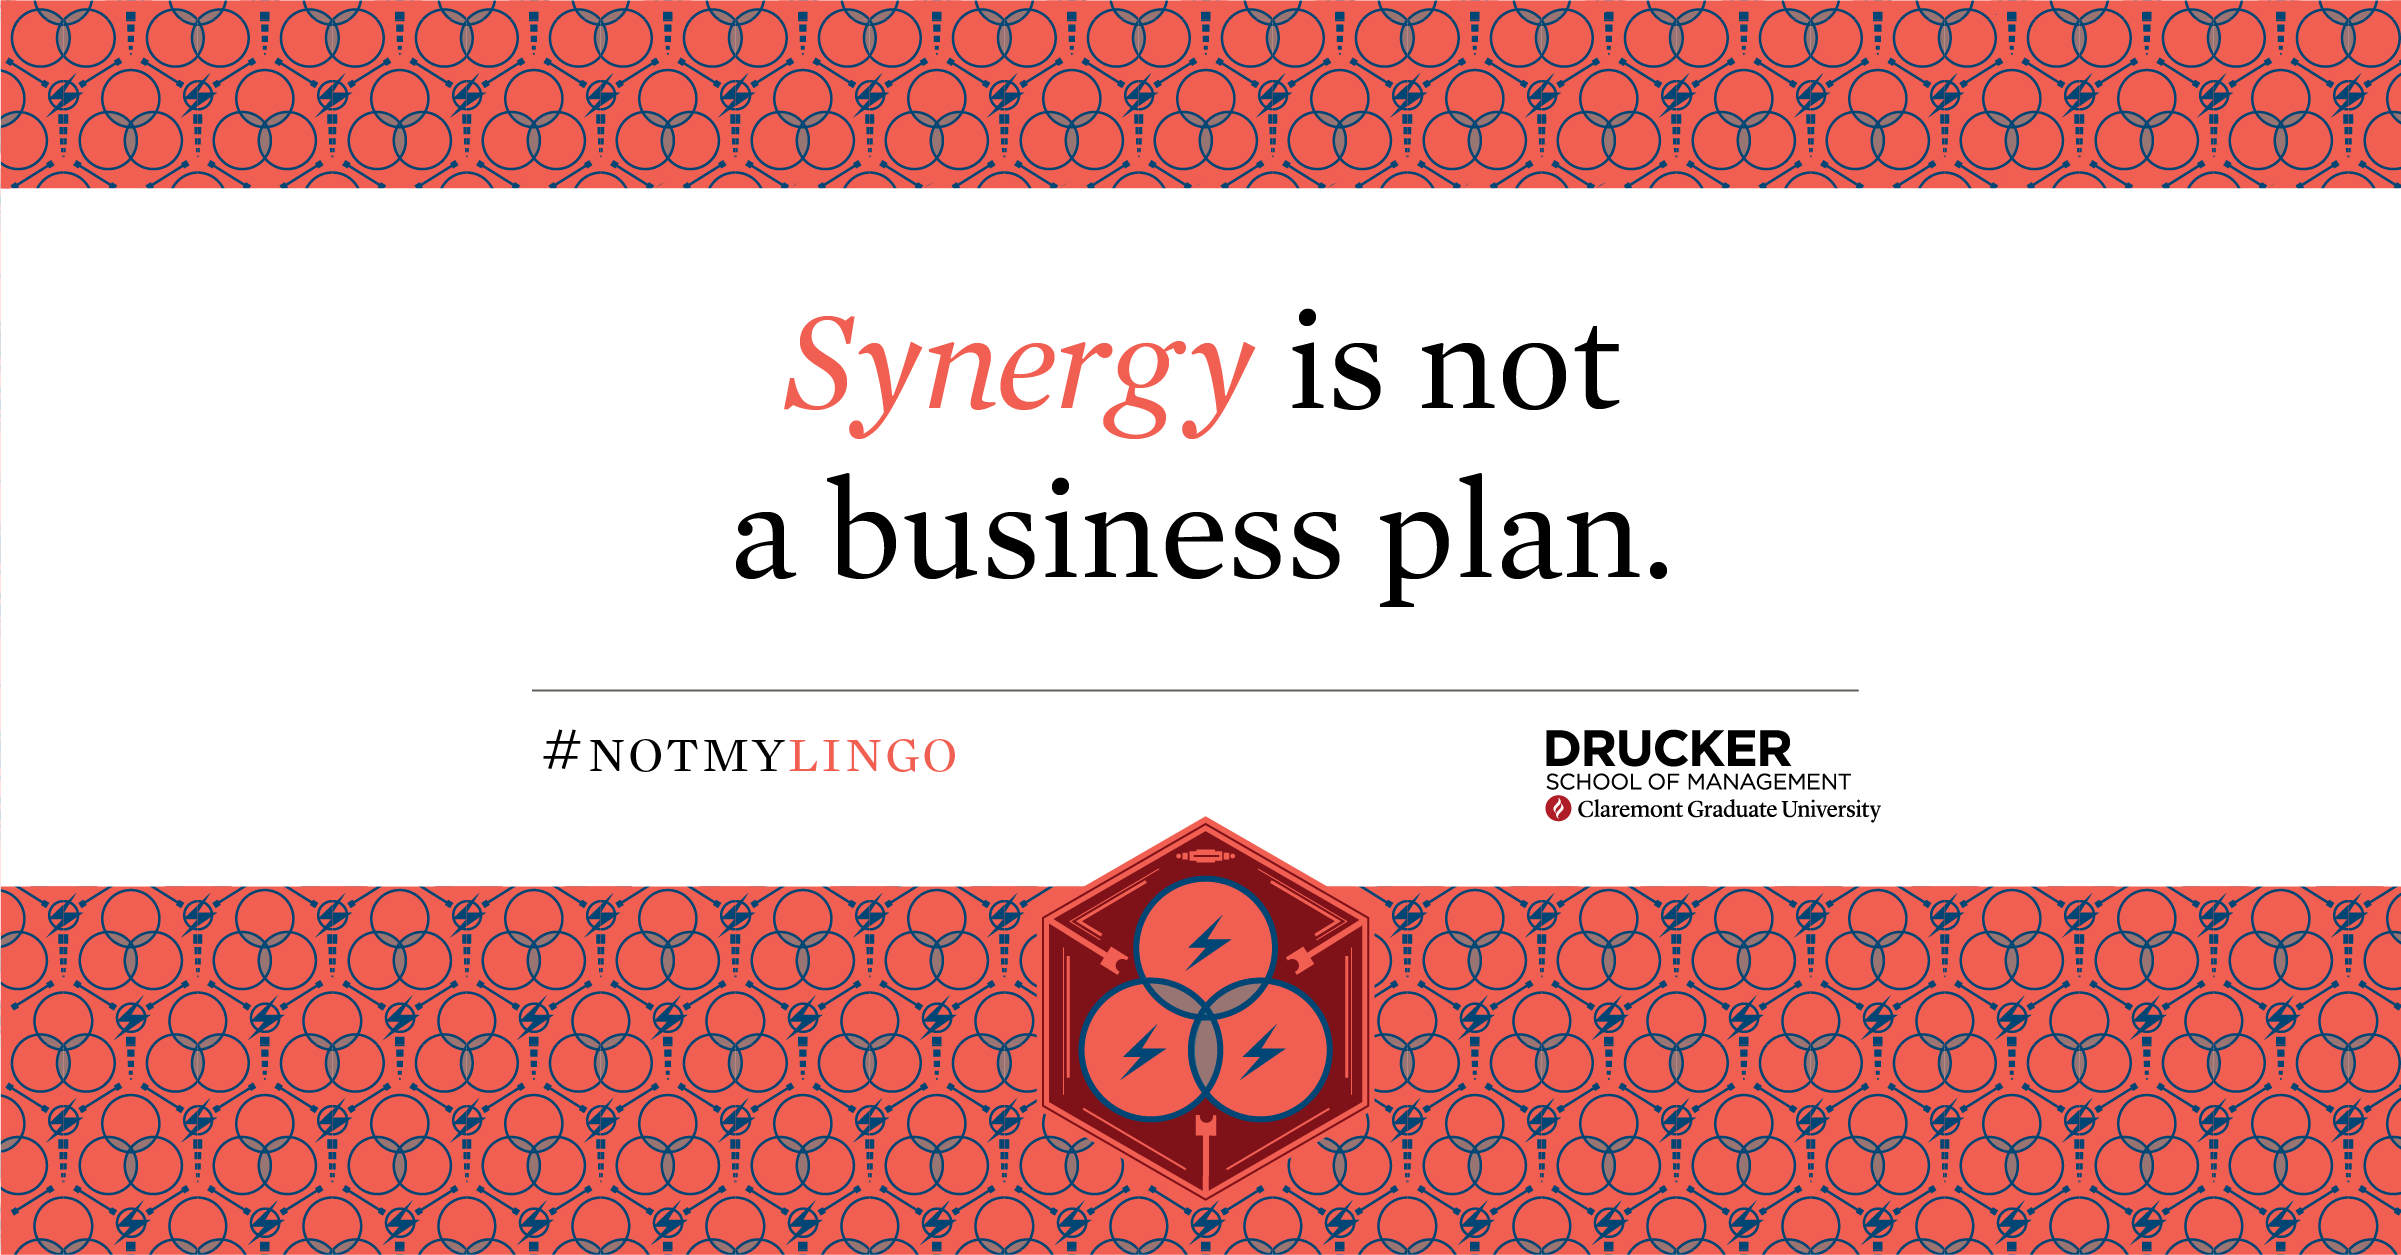 Drucker School of Management Synergy Graphic designed by Kilter